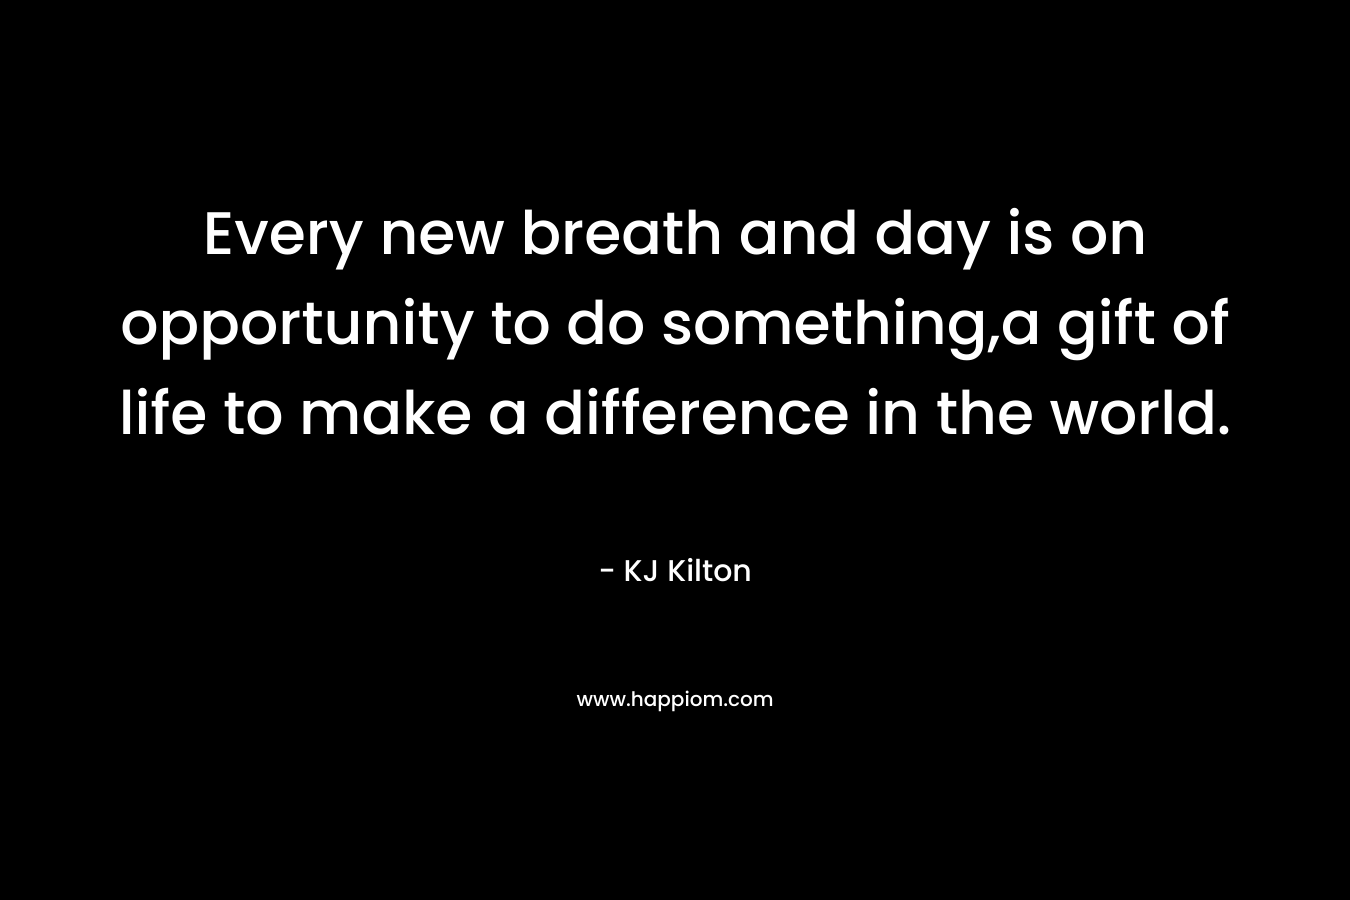 Every new breath and day is on opportunity to do something,a gift of life to make a difference in the world. – KJ Kilton